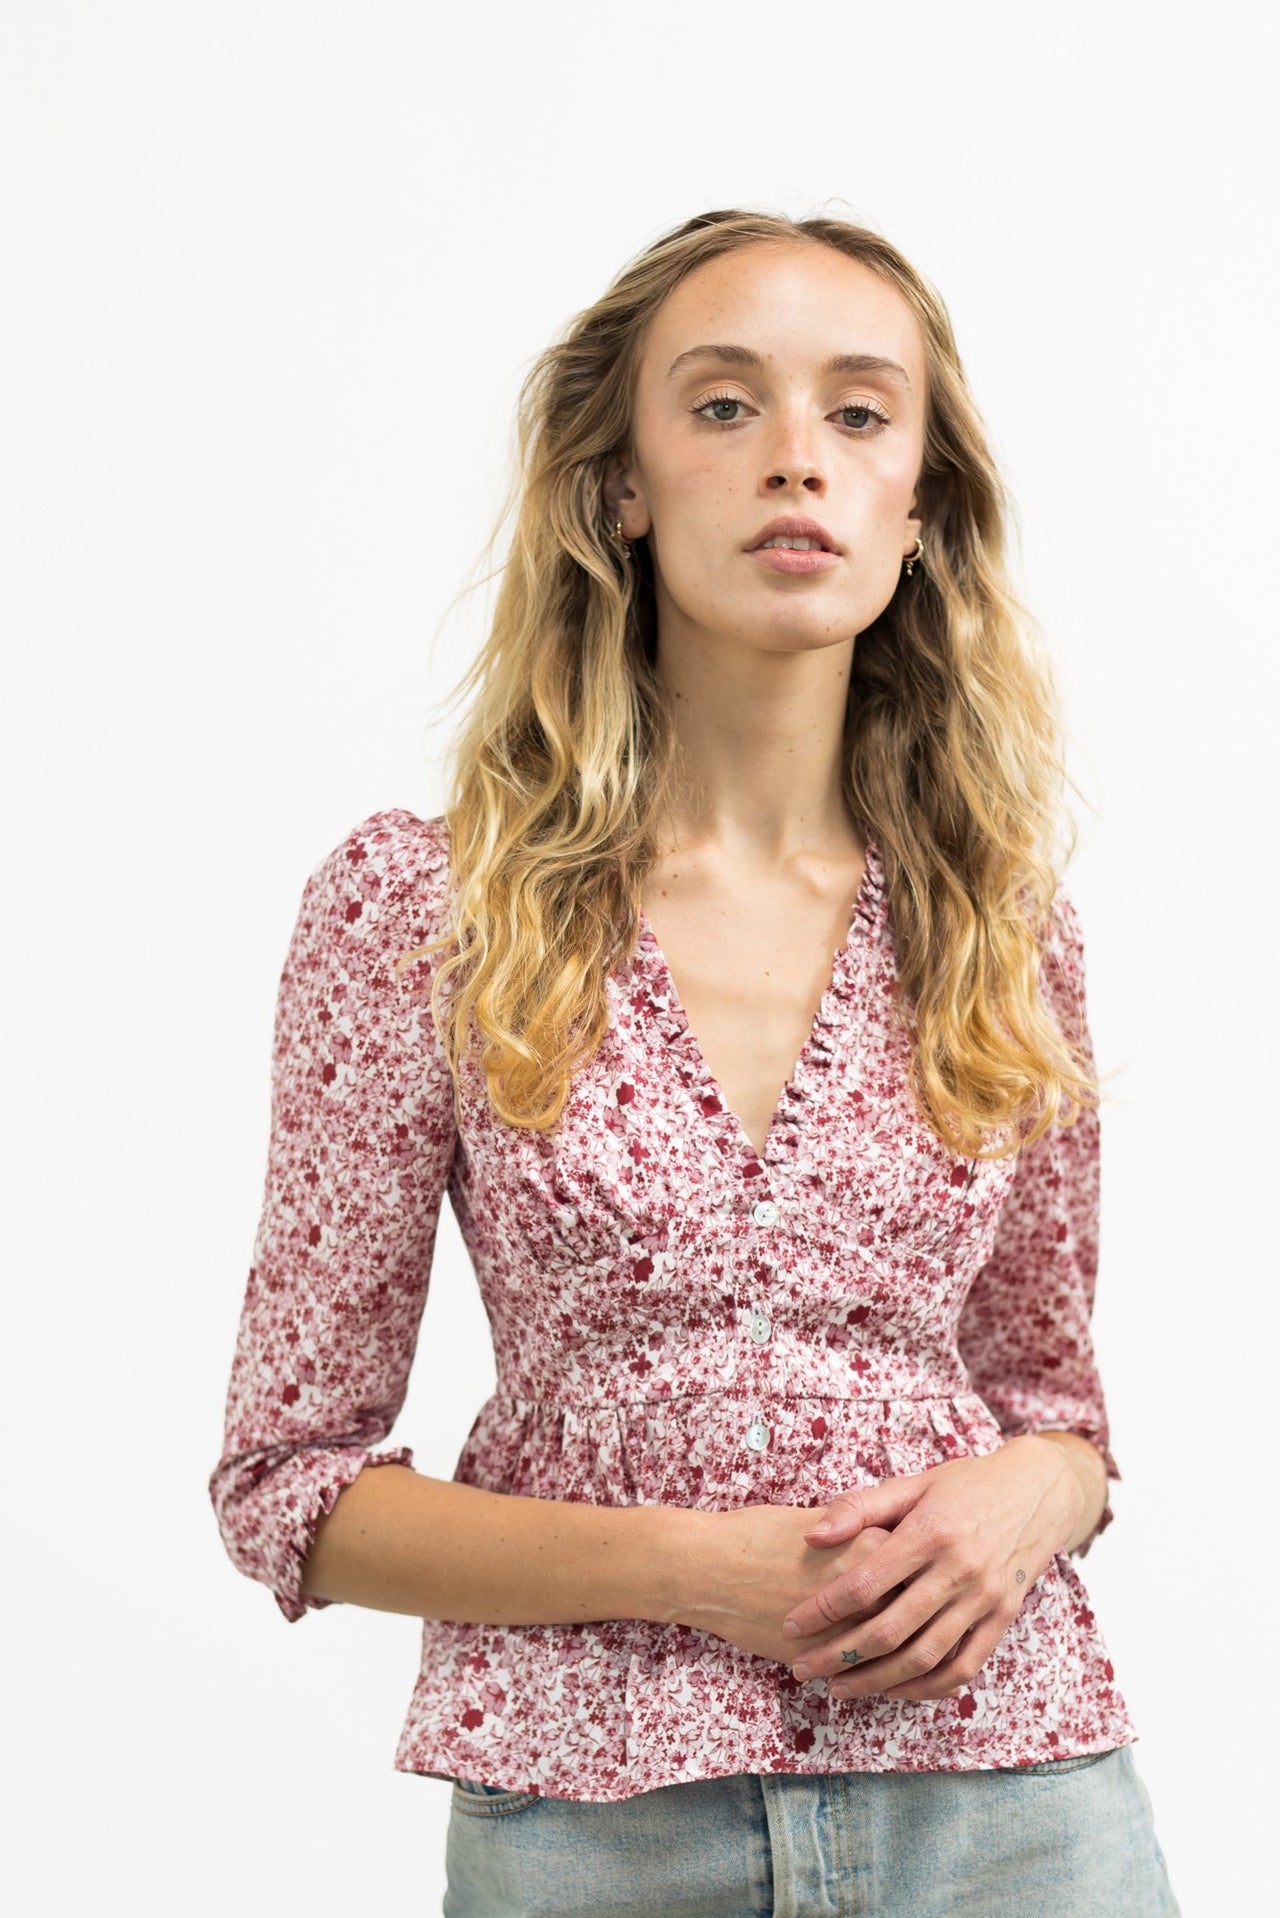 Nia Top / Pink + Milkly White Liberty Floral Cotton with Ruffle